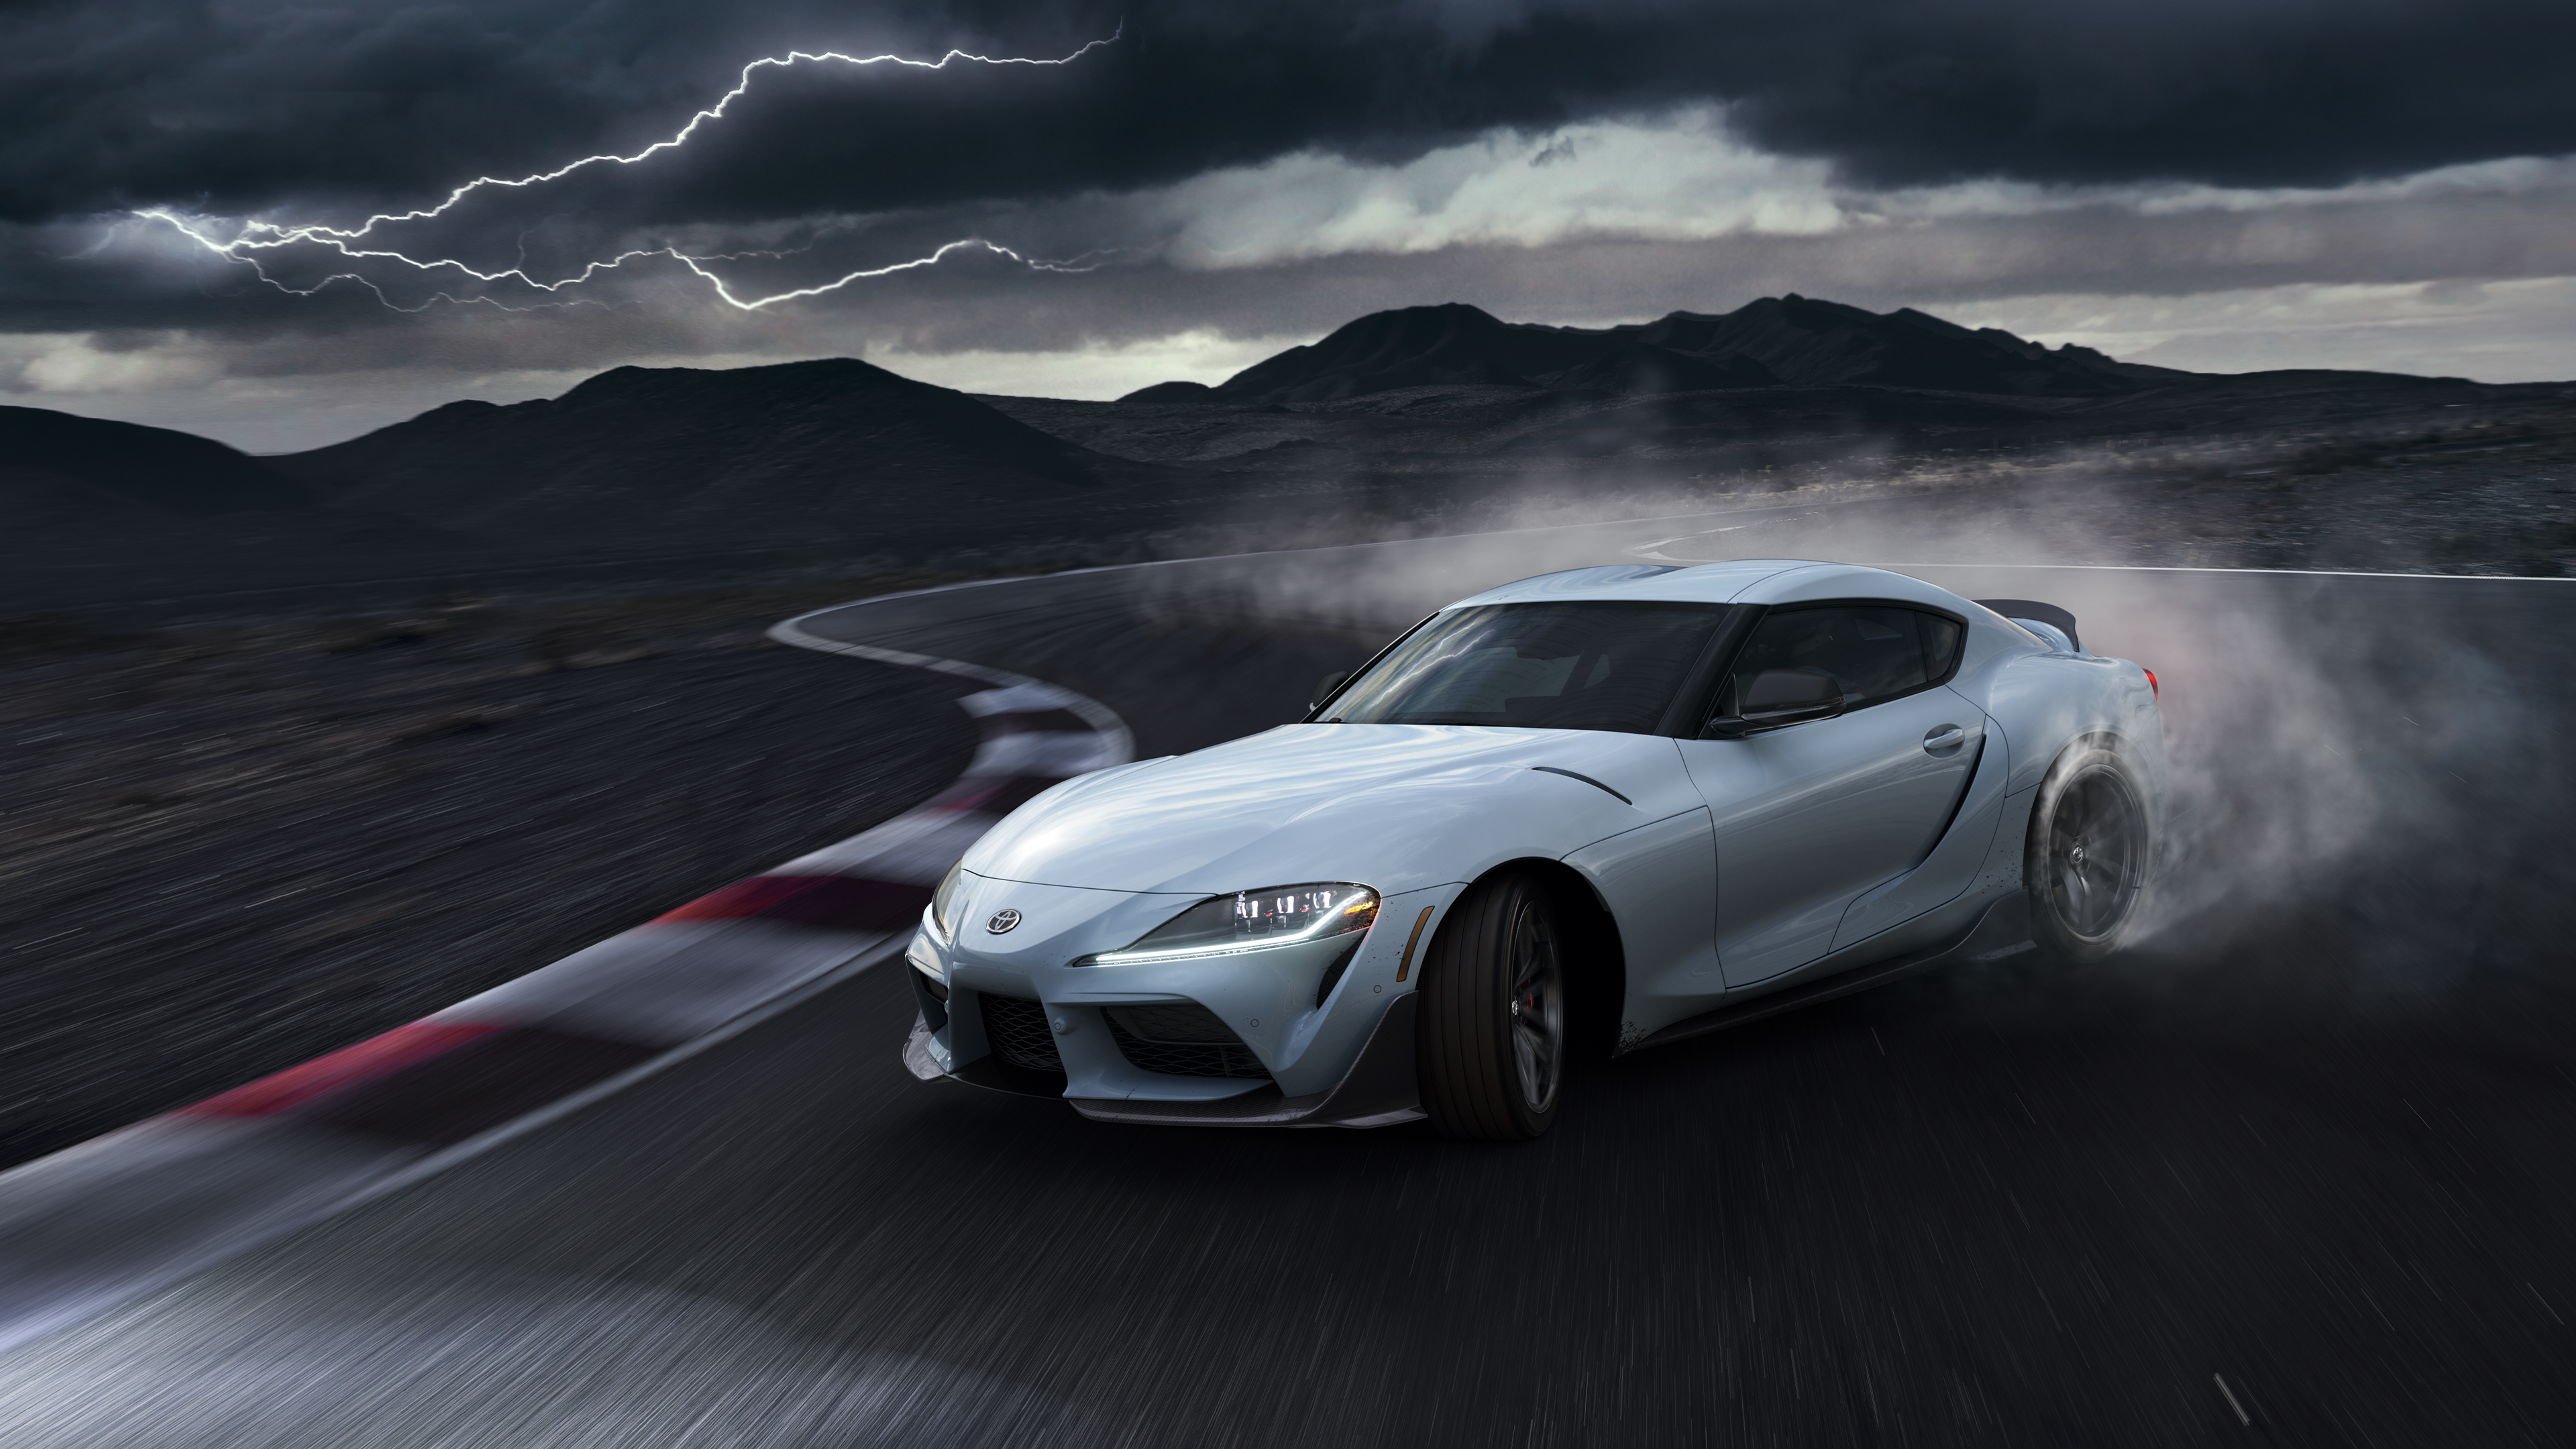 2022 Toyota GR Supra On The Move